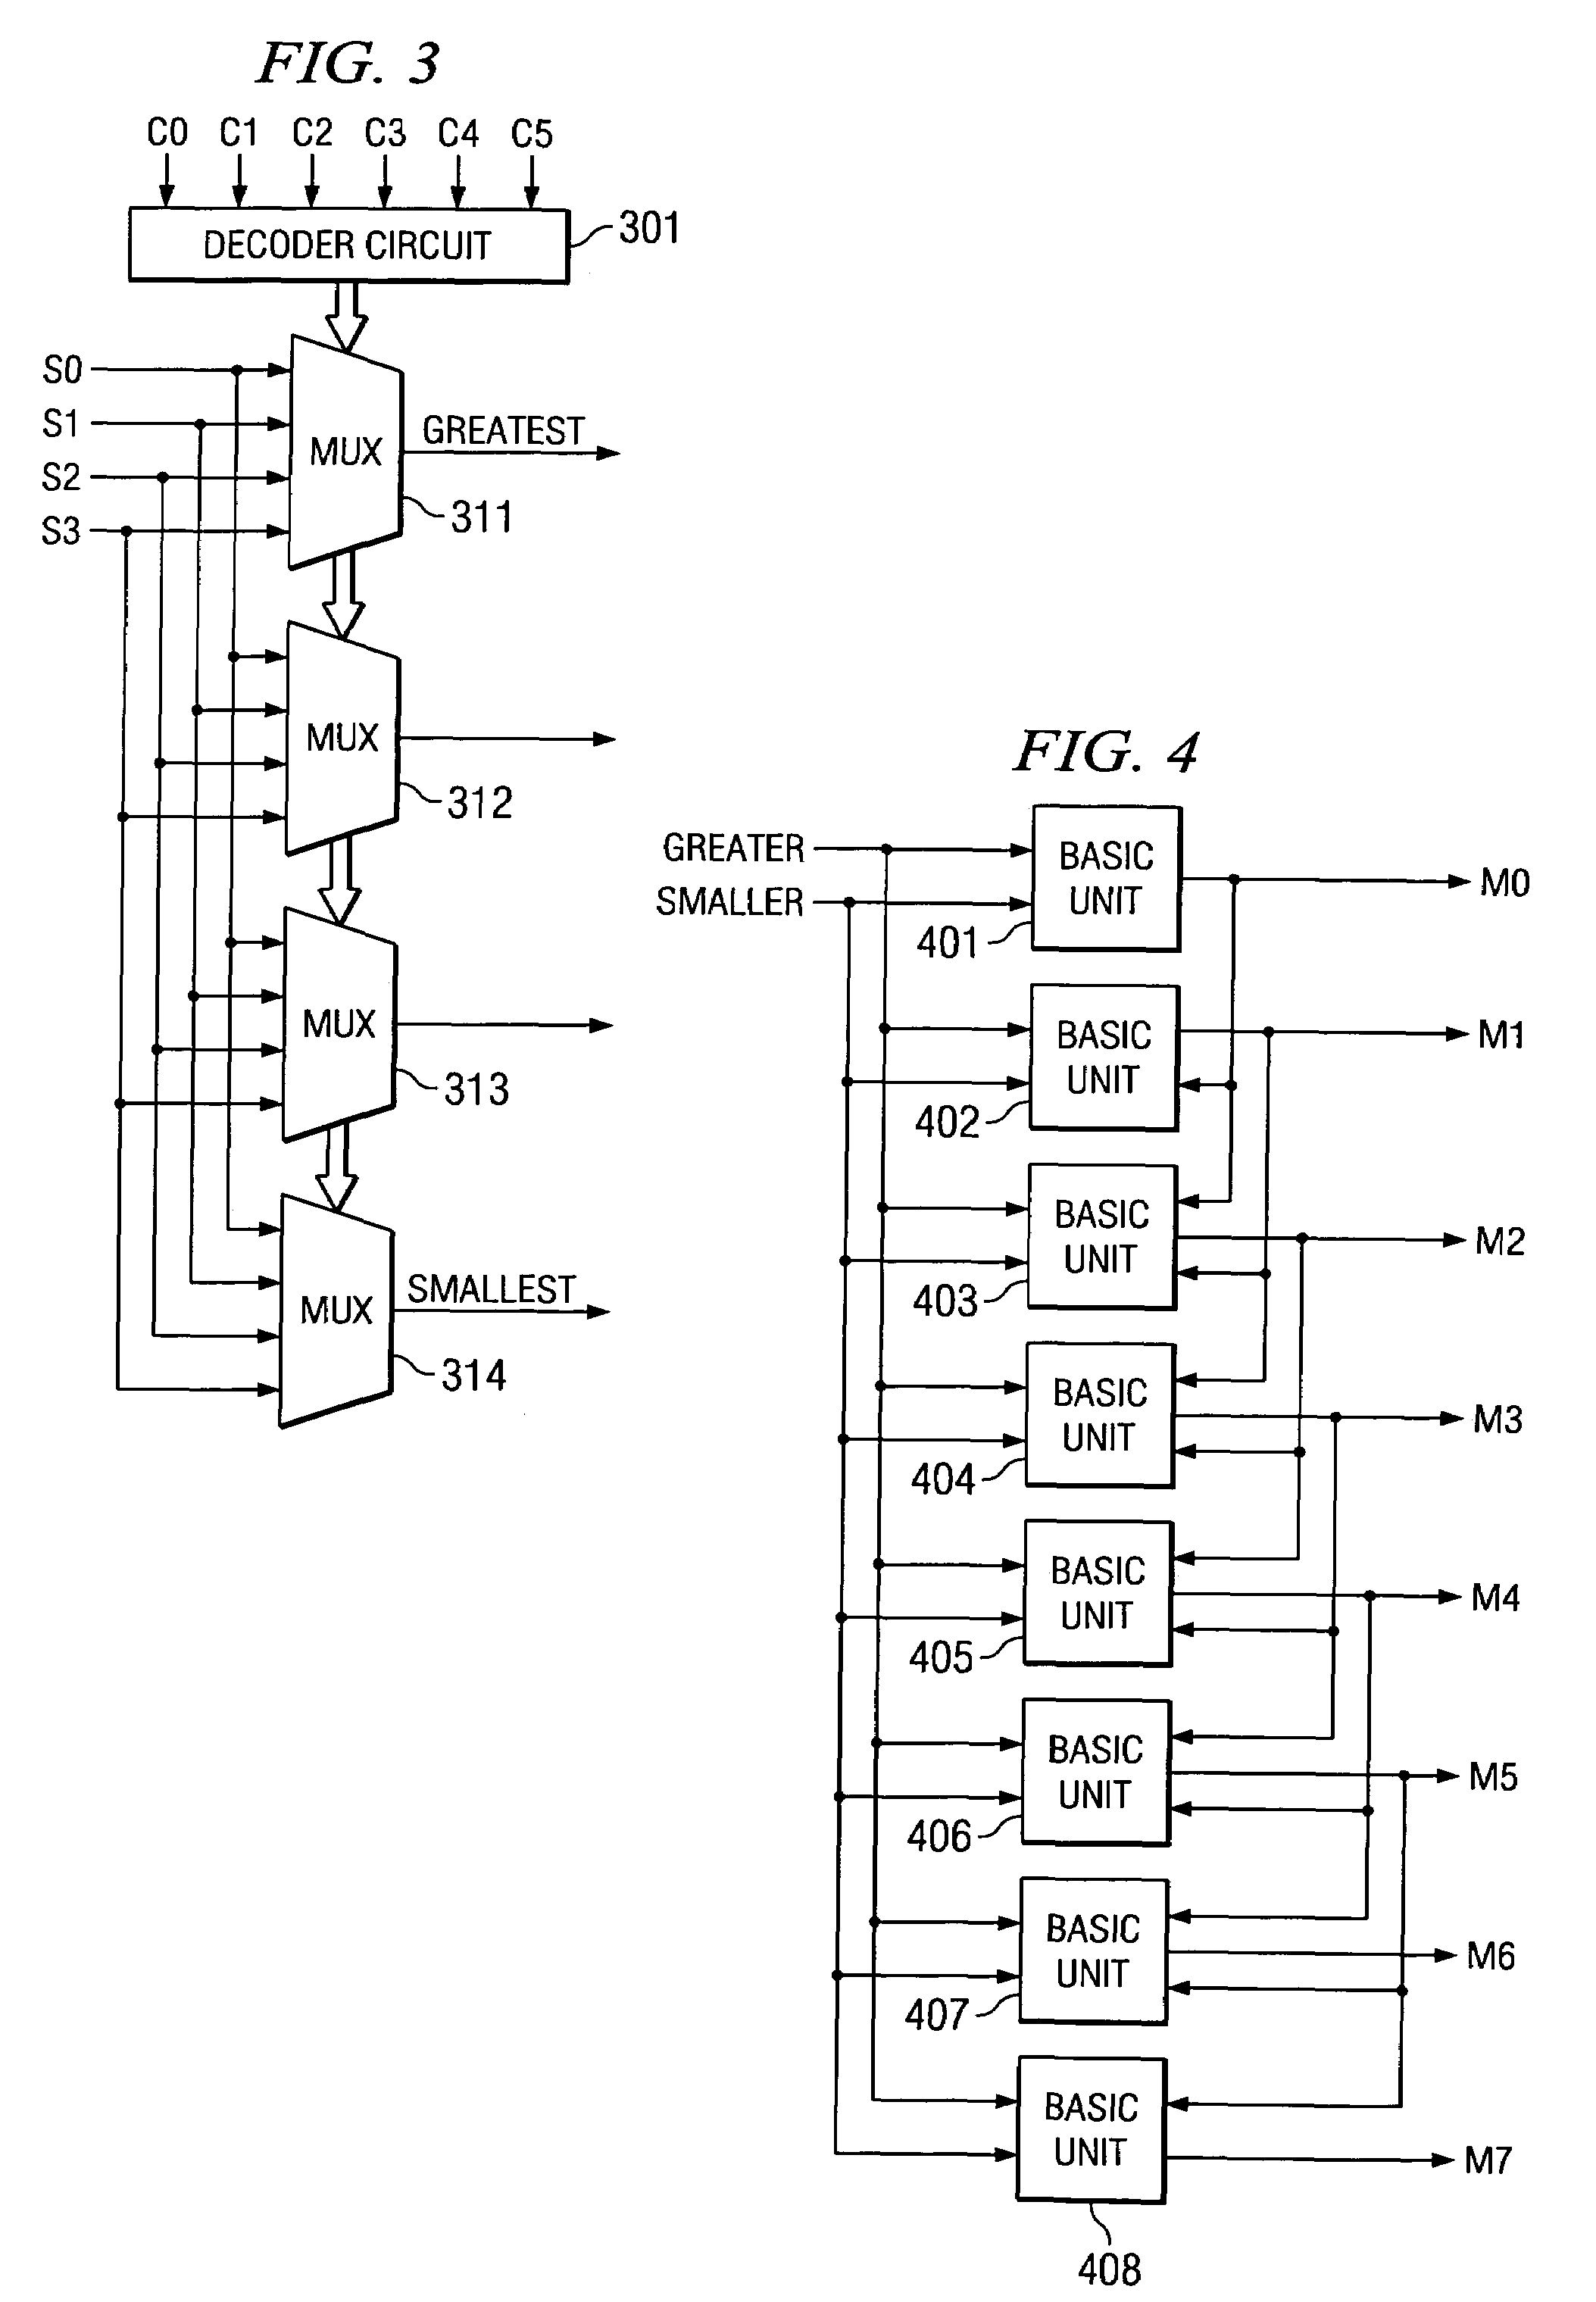 VLSI architecture and implementation for single cycle insertion of multiple records into a priority sorted list